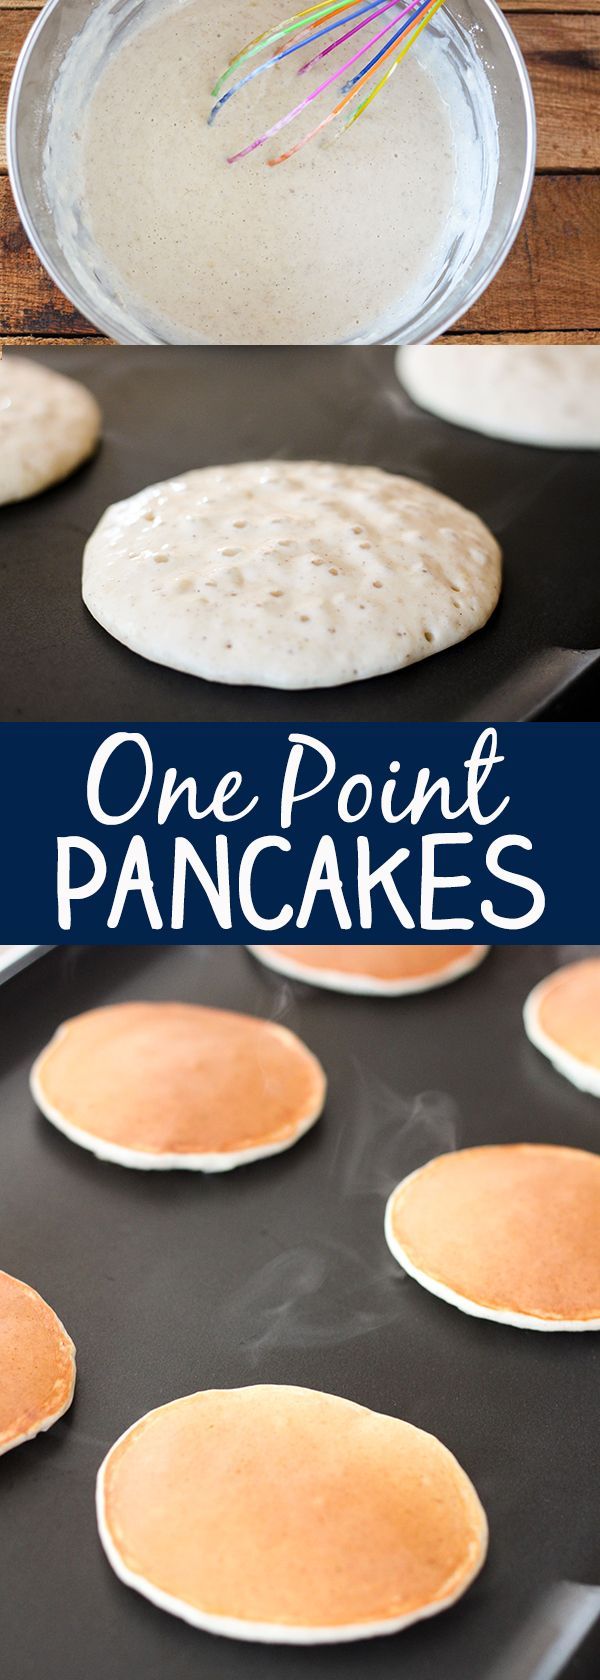 Skinny One Point Pancakes – each pancake is just 40 calories and 1 Weight Watchers Smart Point.